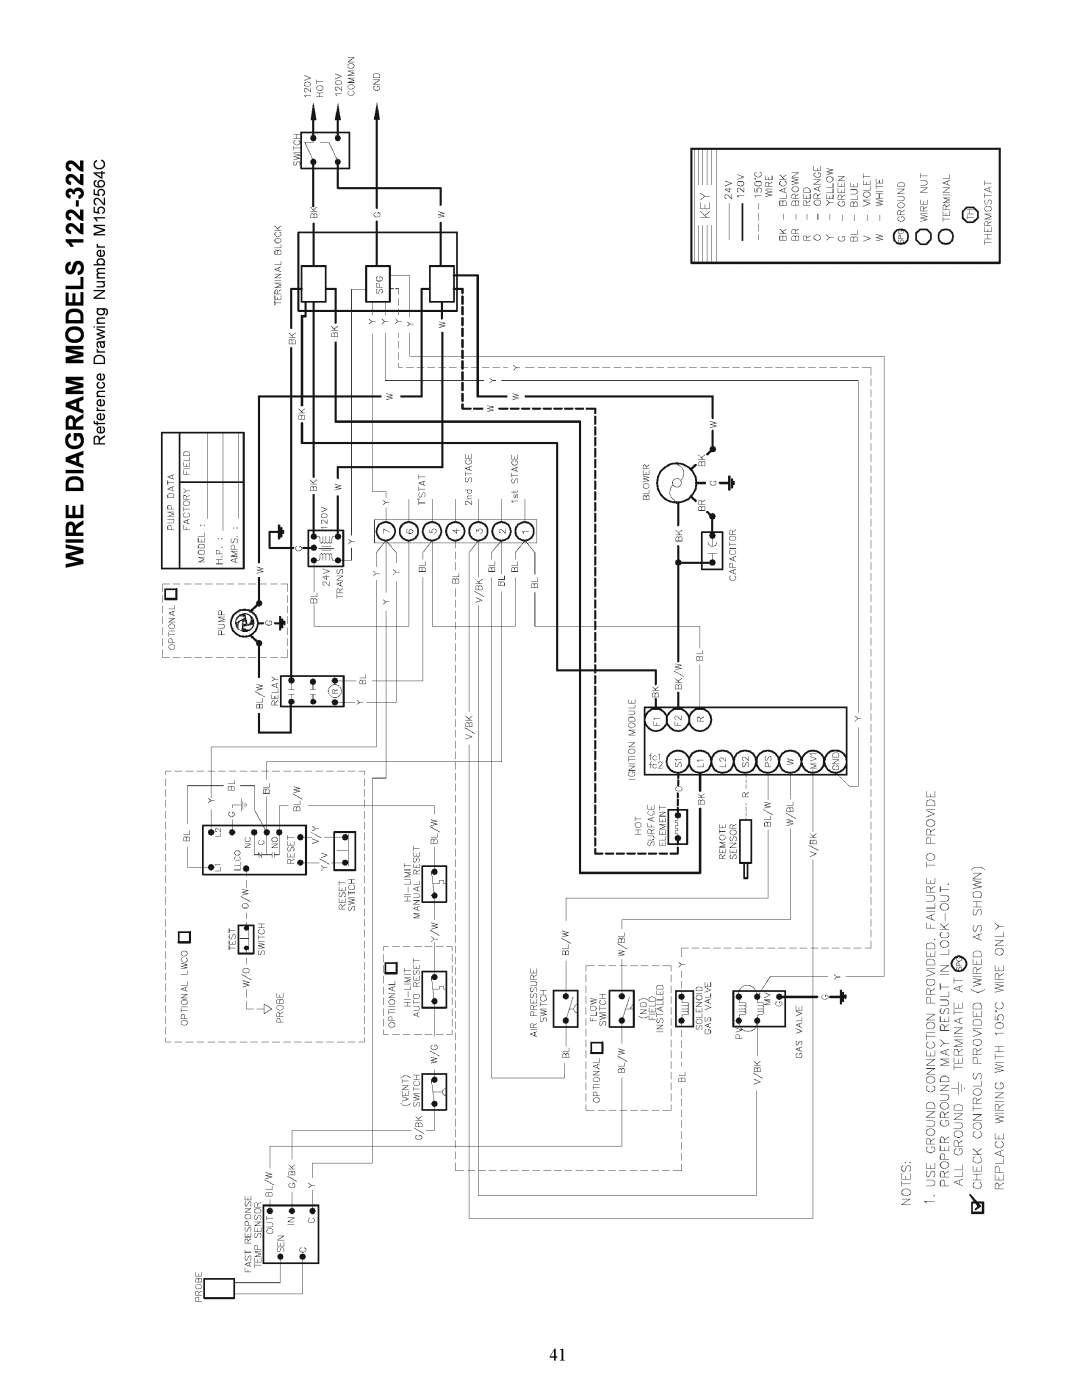 Raypak 122-322 installation instructions Wire Diagram Models, Reference Drawing Number M152564C 